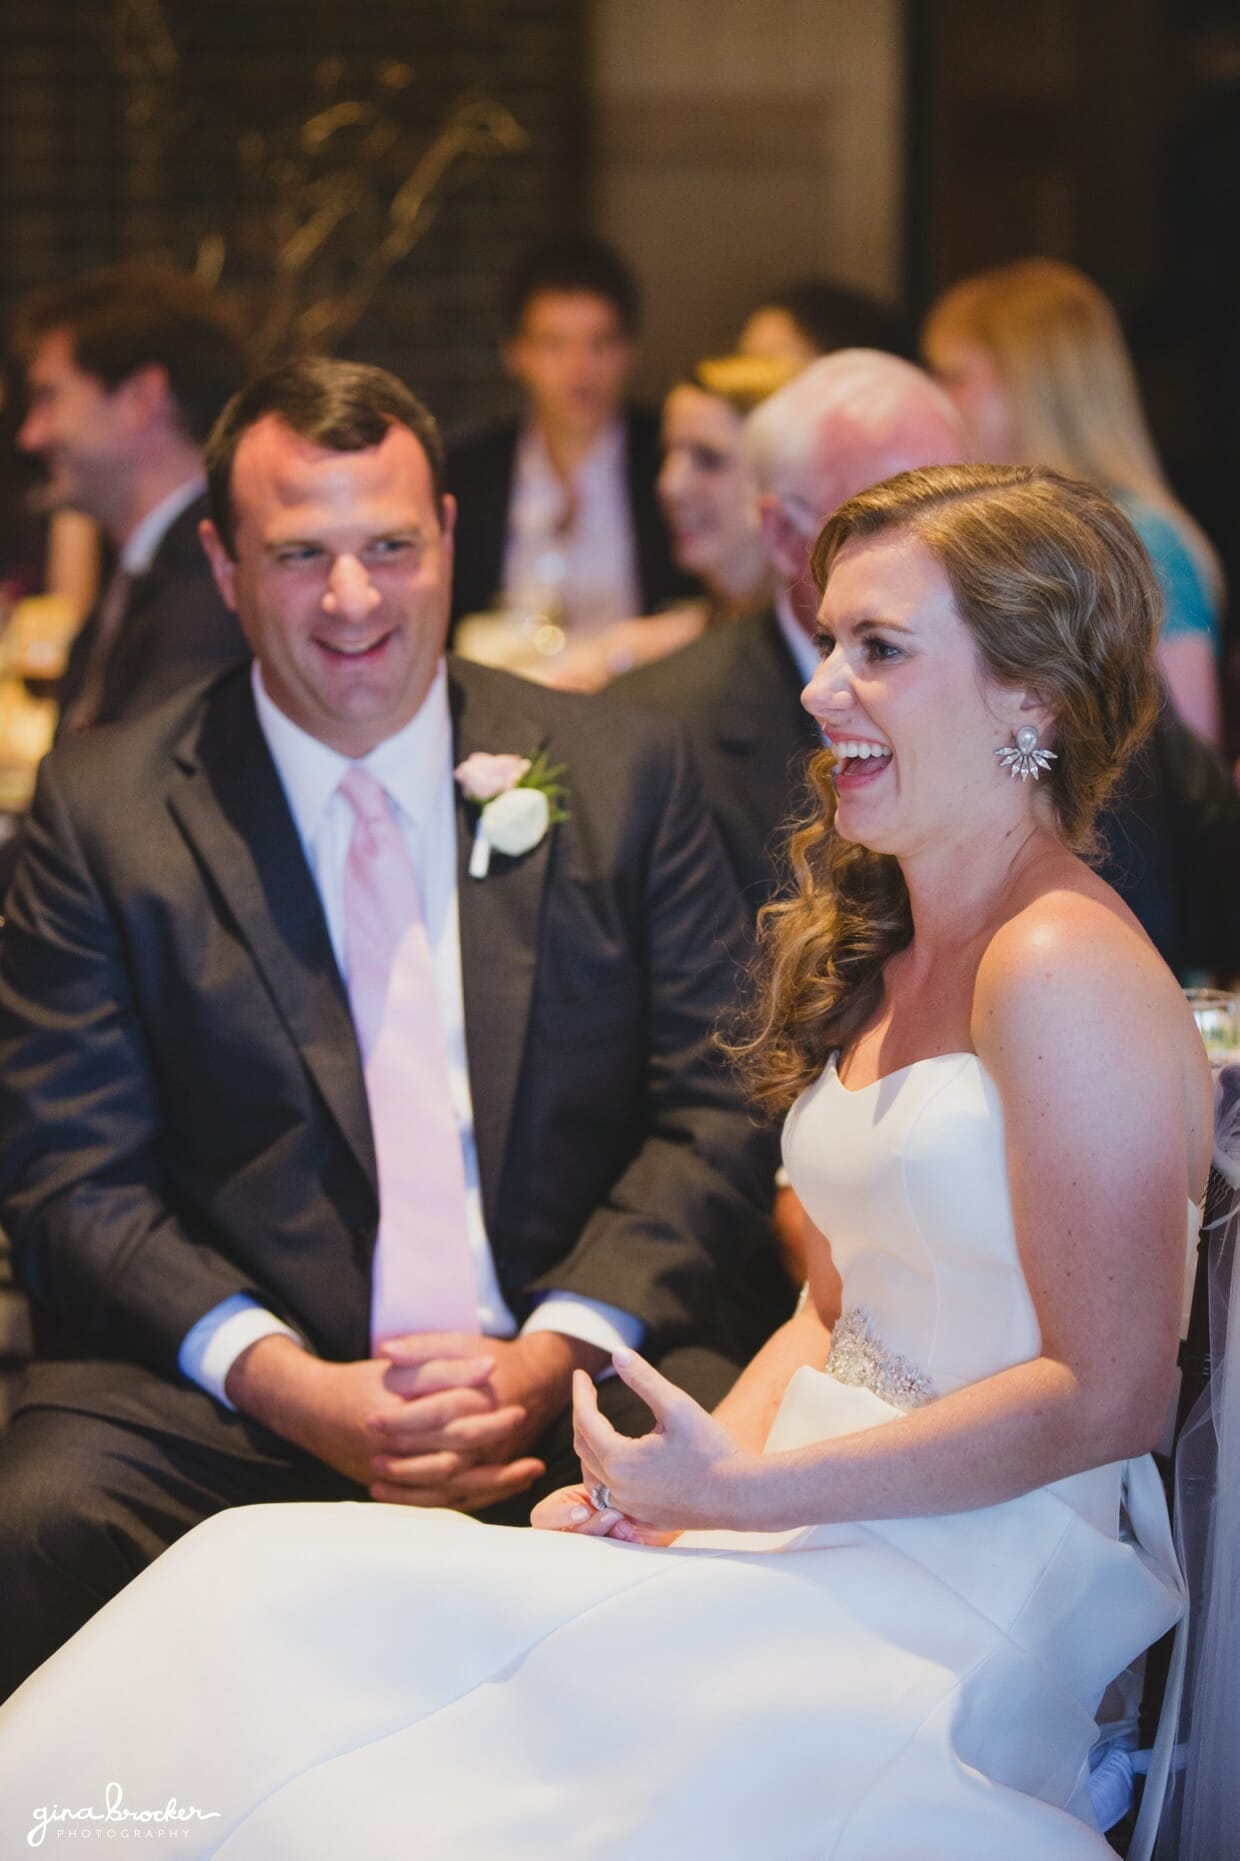 A bride and groom laugh during the speeches at their classic and elegant Boston wedding in Massachusetts